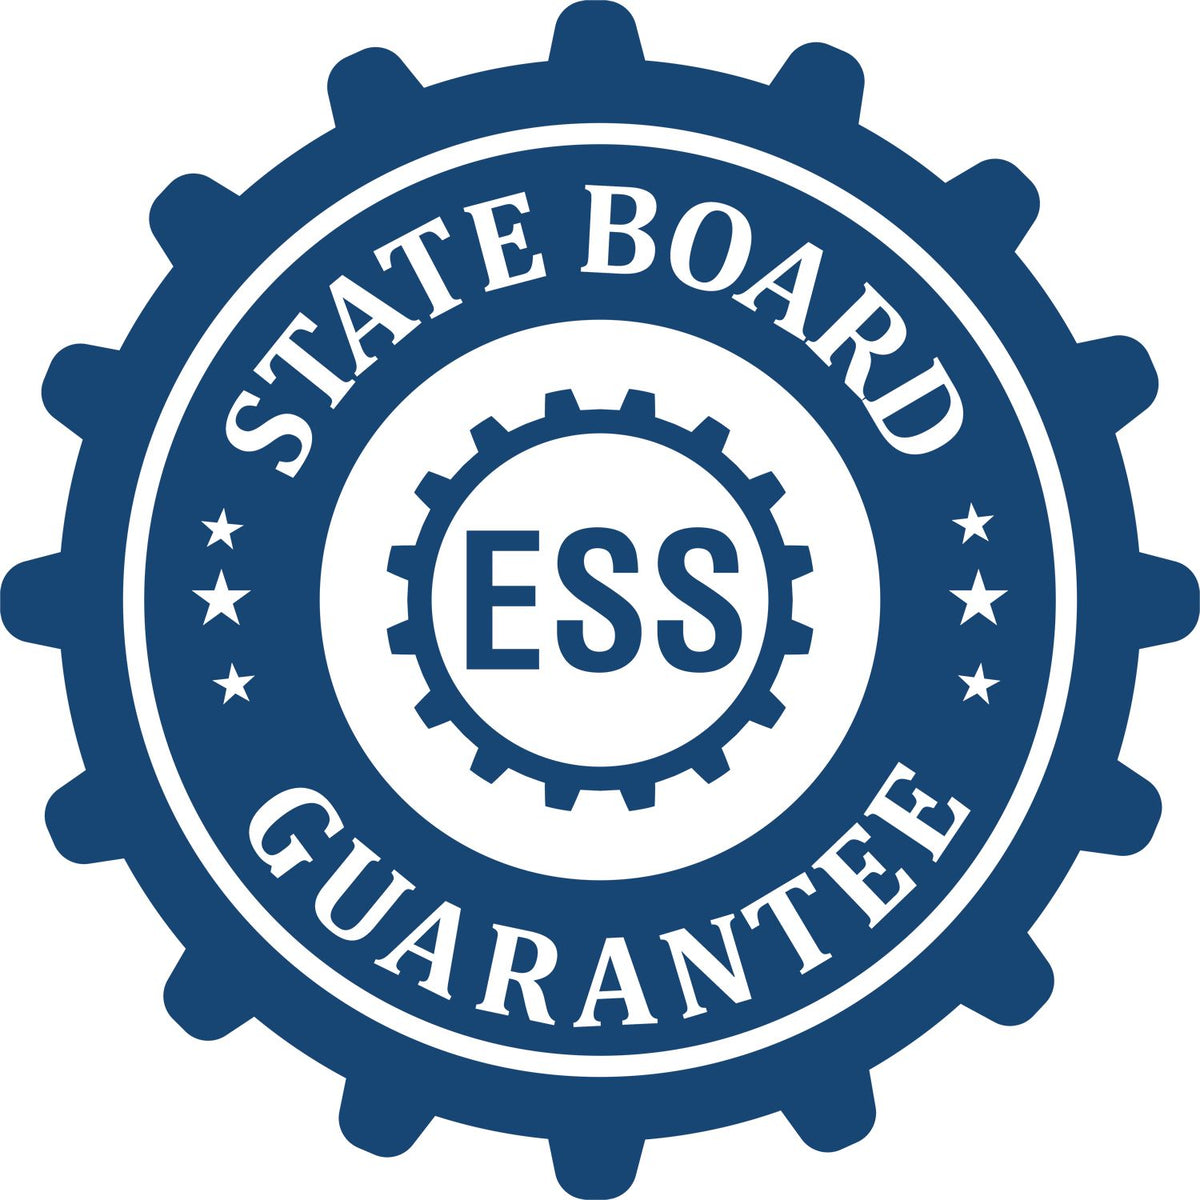 An emblem in a gear shape illustrating a state board guarantee for the Handheld South Carolina Professional Geologist Embosser